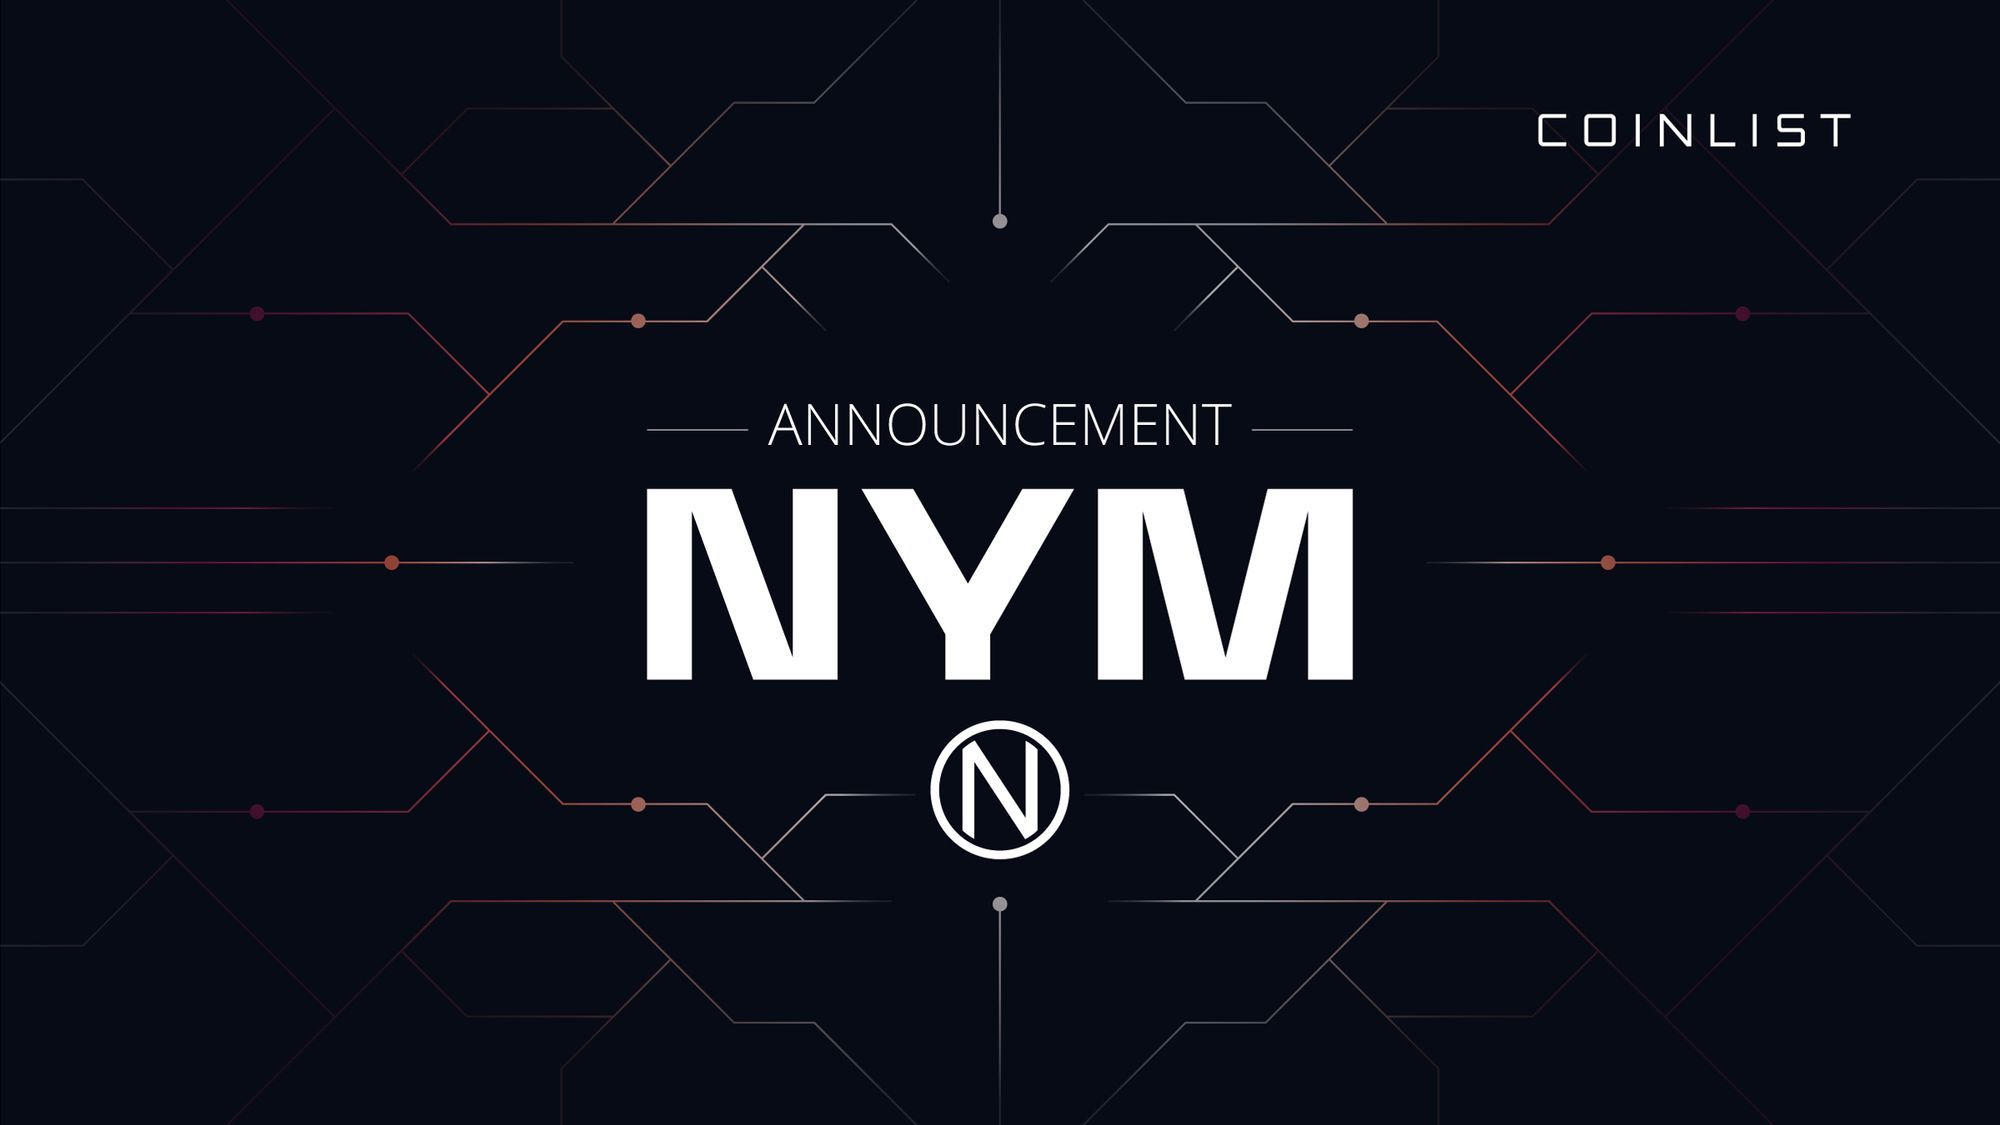 Nym (NYM) Now Trading on CoinList